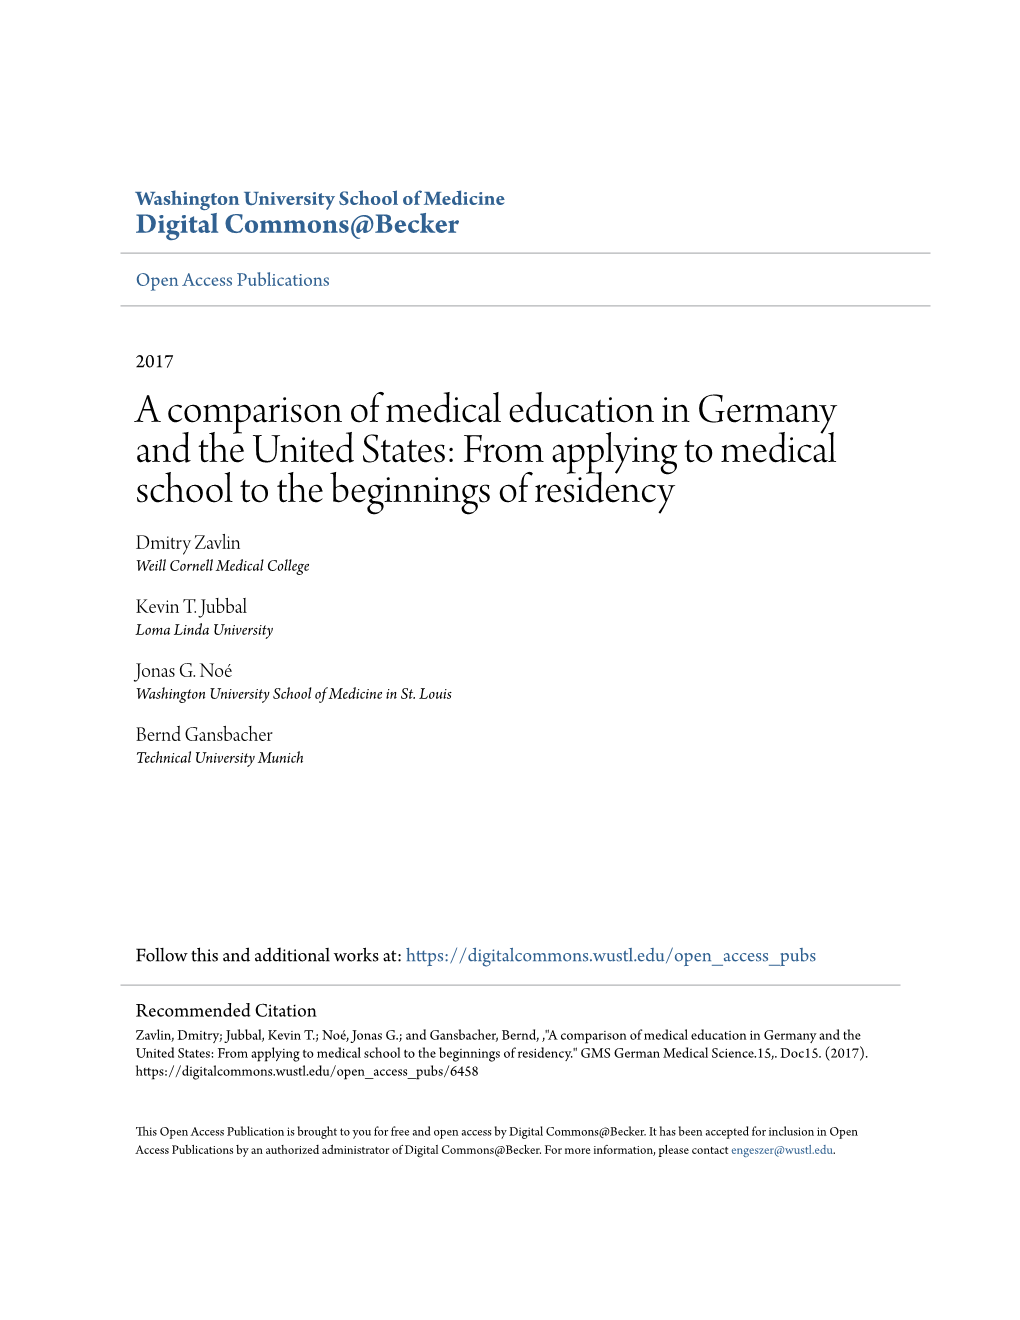 A Comparison of Medical Education in Germany and the United States